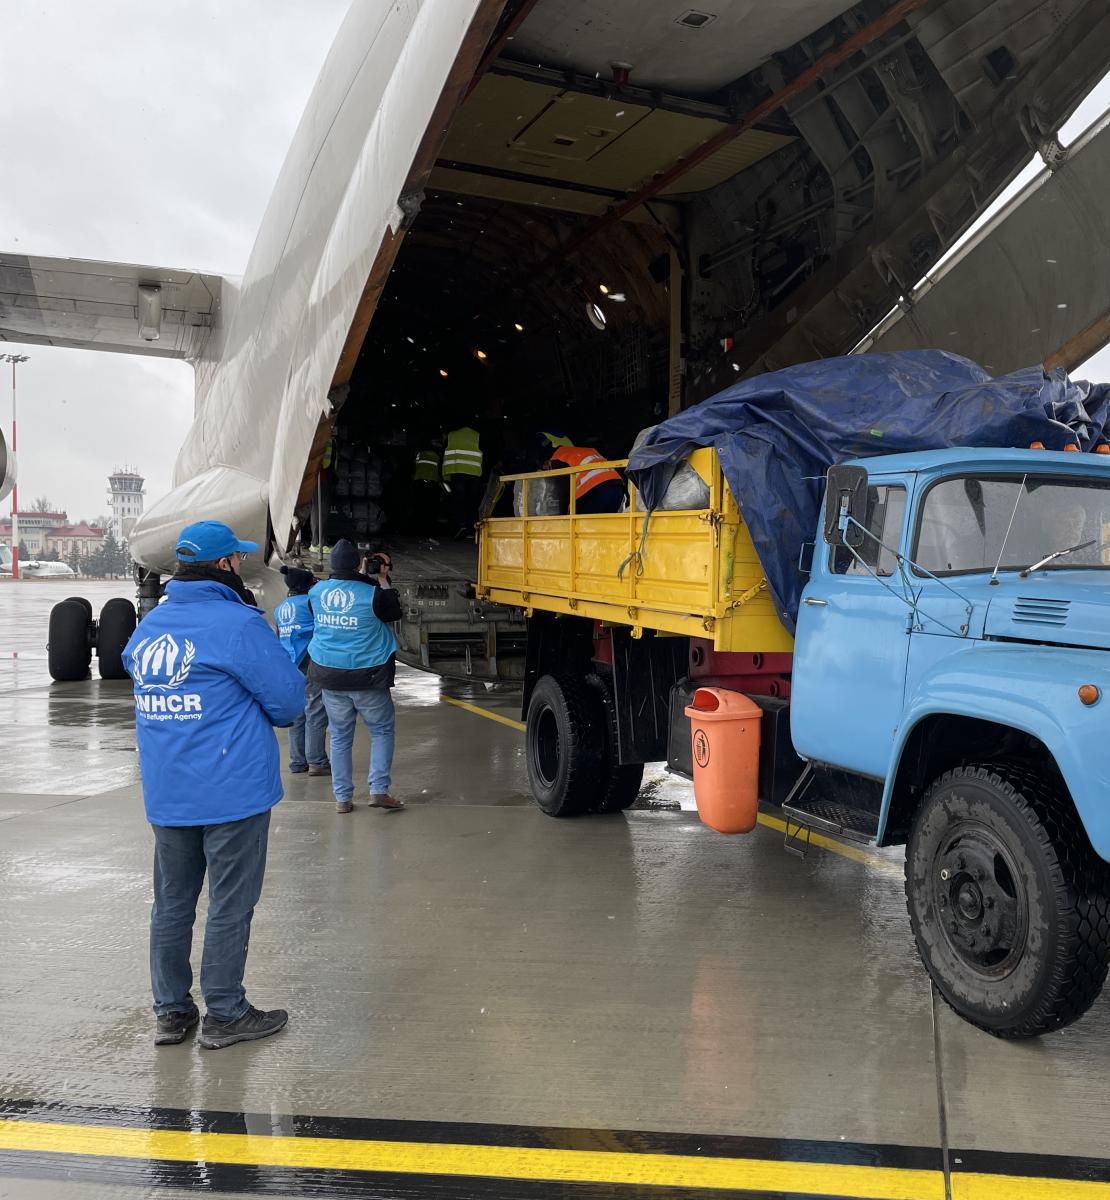 People load supplies onto a plane in the hangar area. 